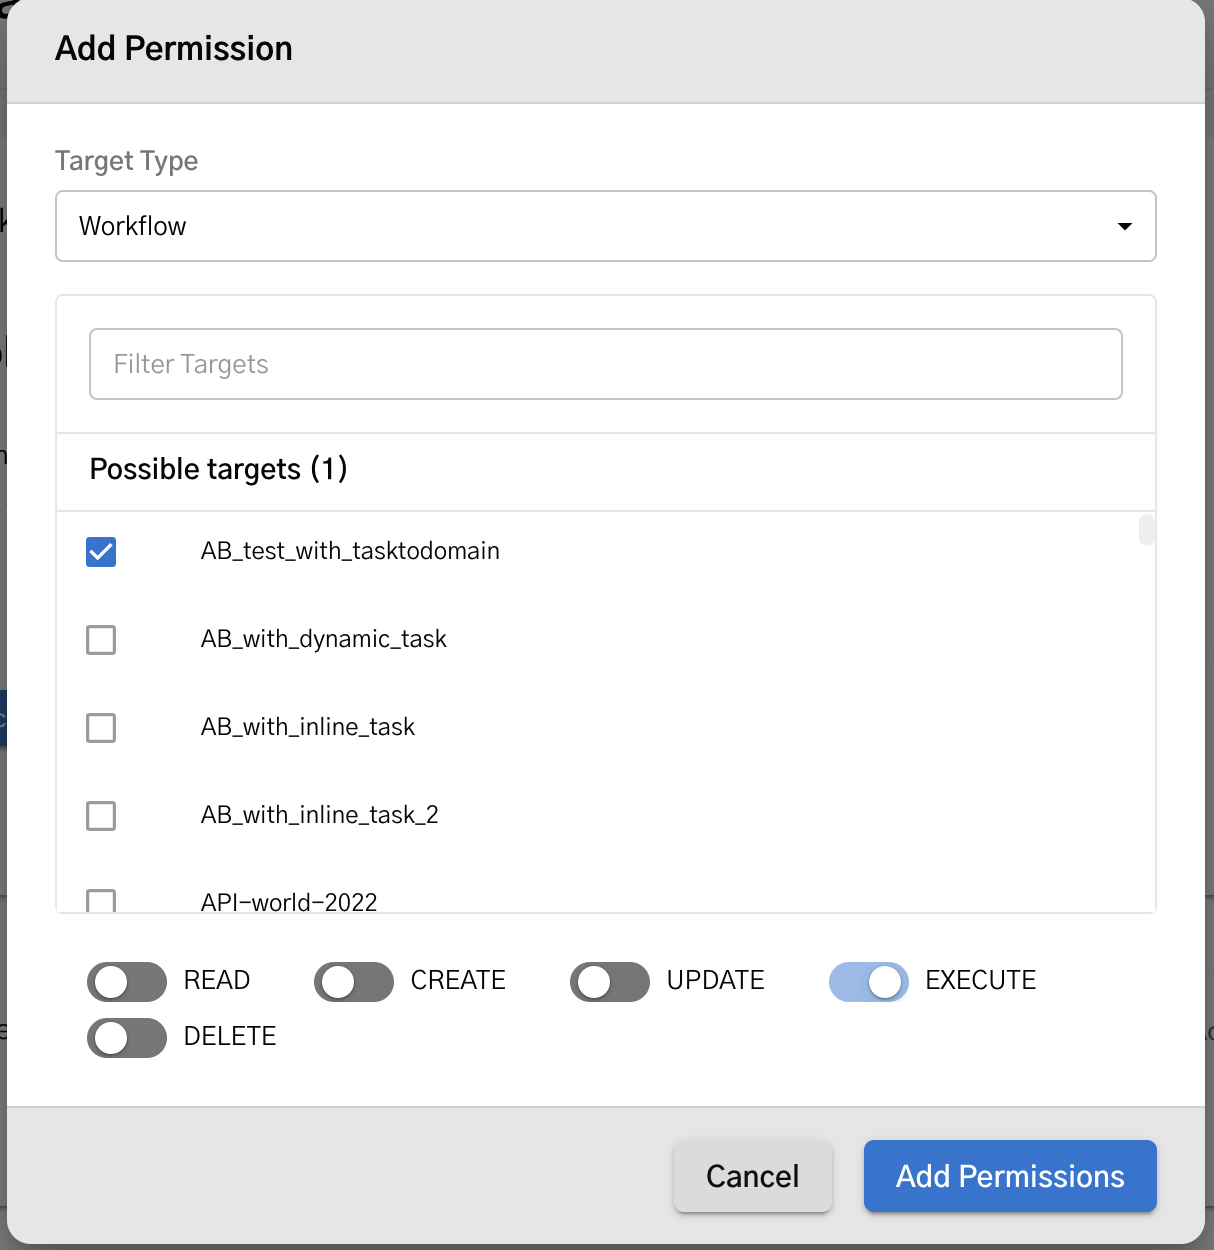 Adding permissions for the tasks/workflows